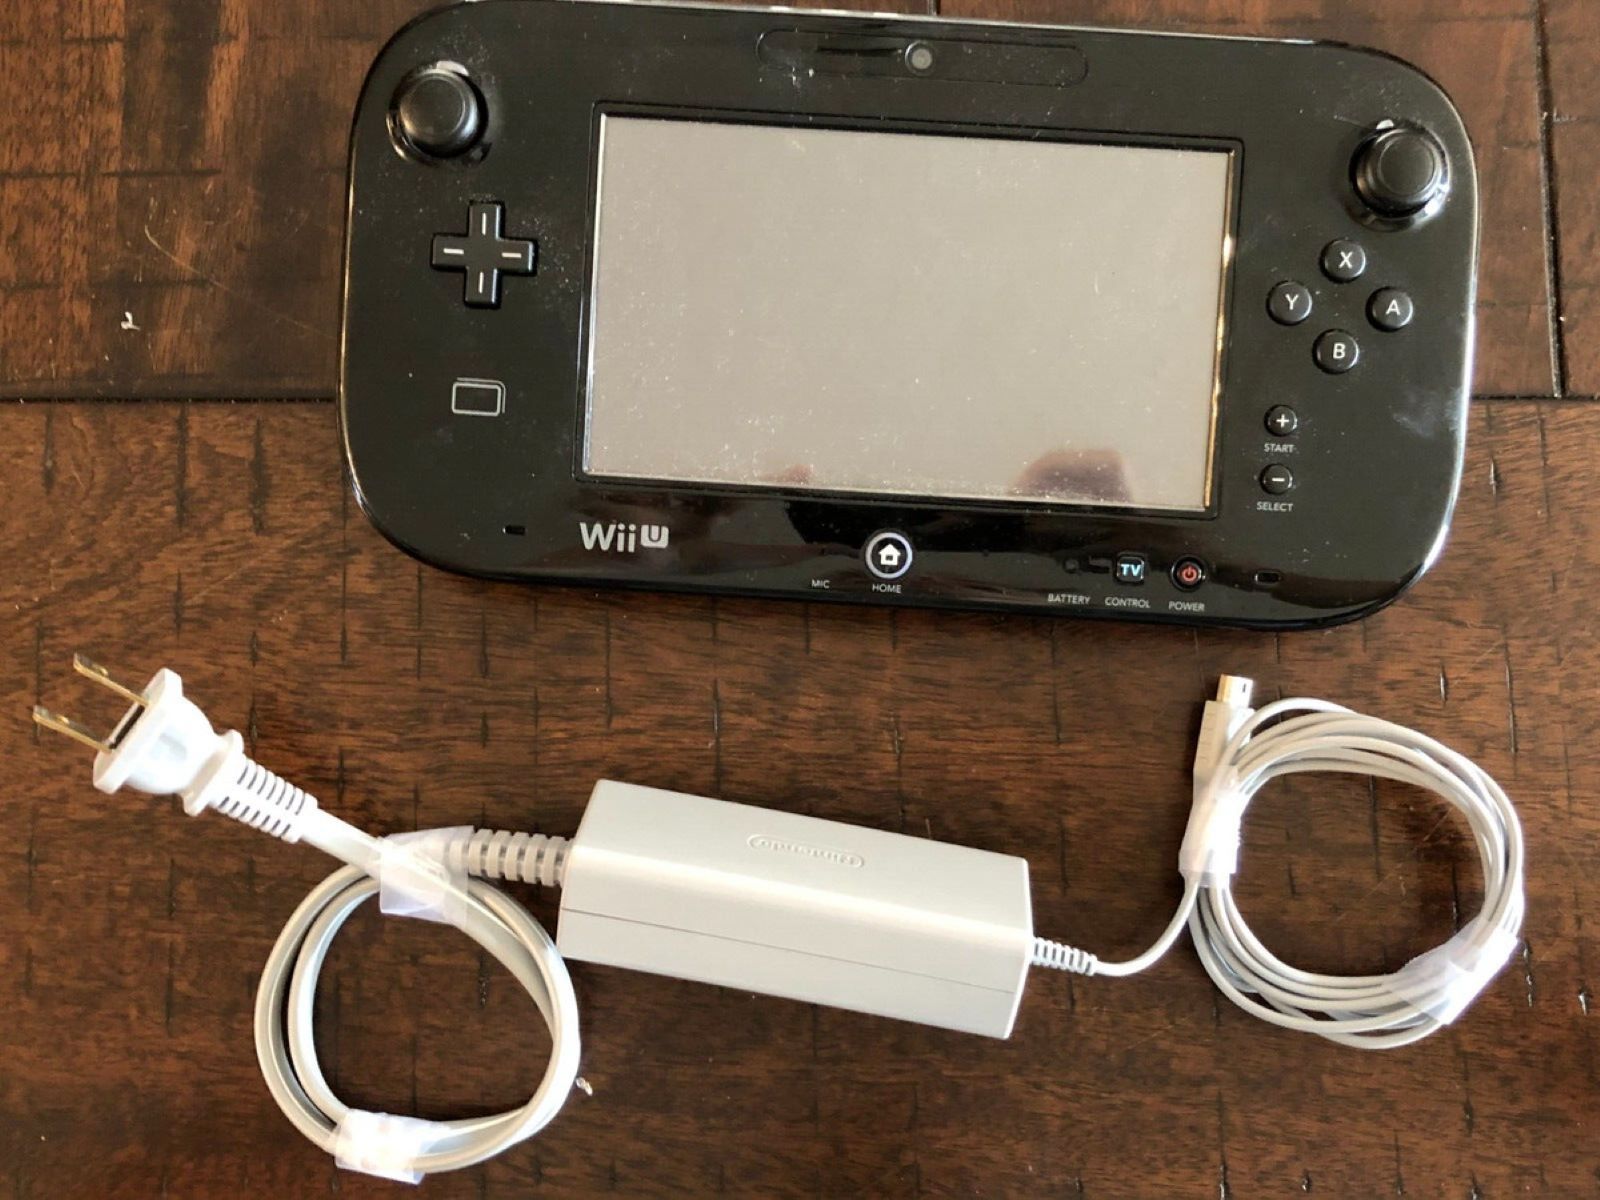 Wii U Gamepad Charging Time: Quick Facts